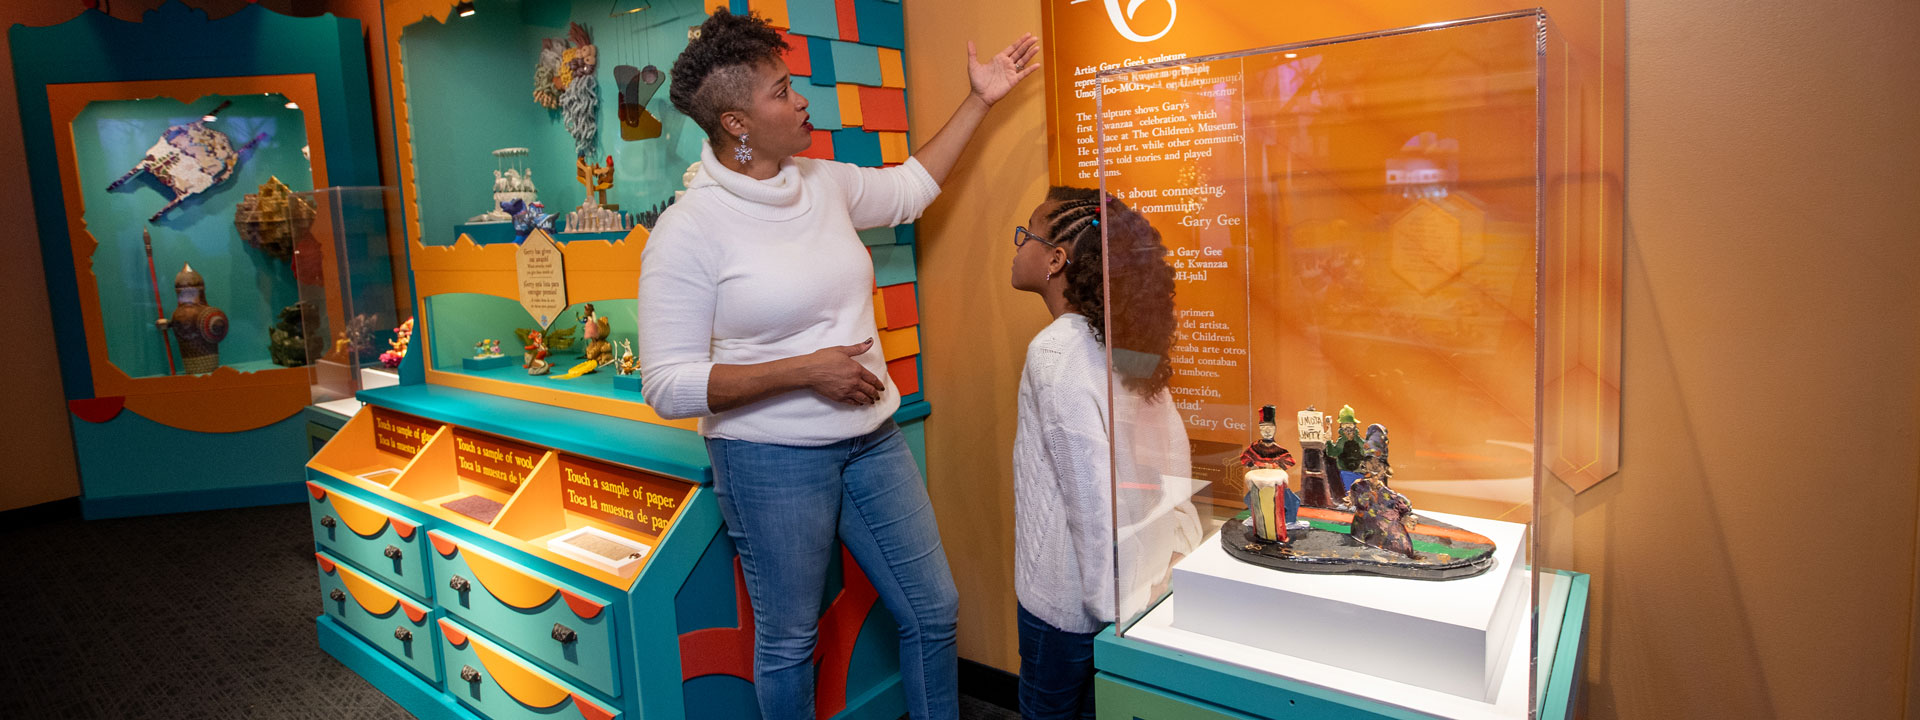 An African American mother and daughter stand in front of a label in Gerty's workshop actively engaged in reading and discussing the content which is about Kwanzaa.